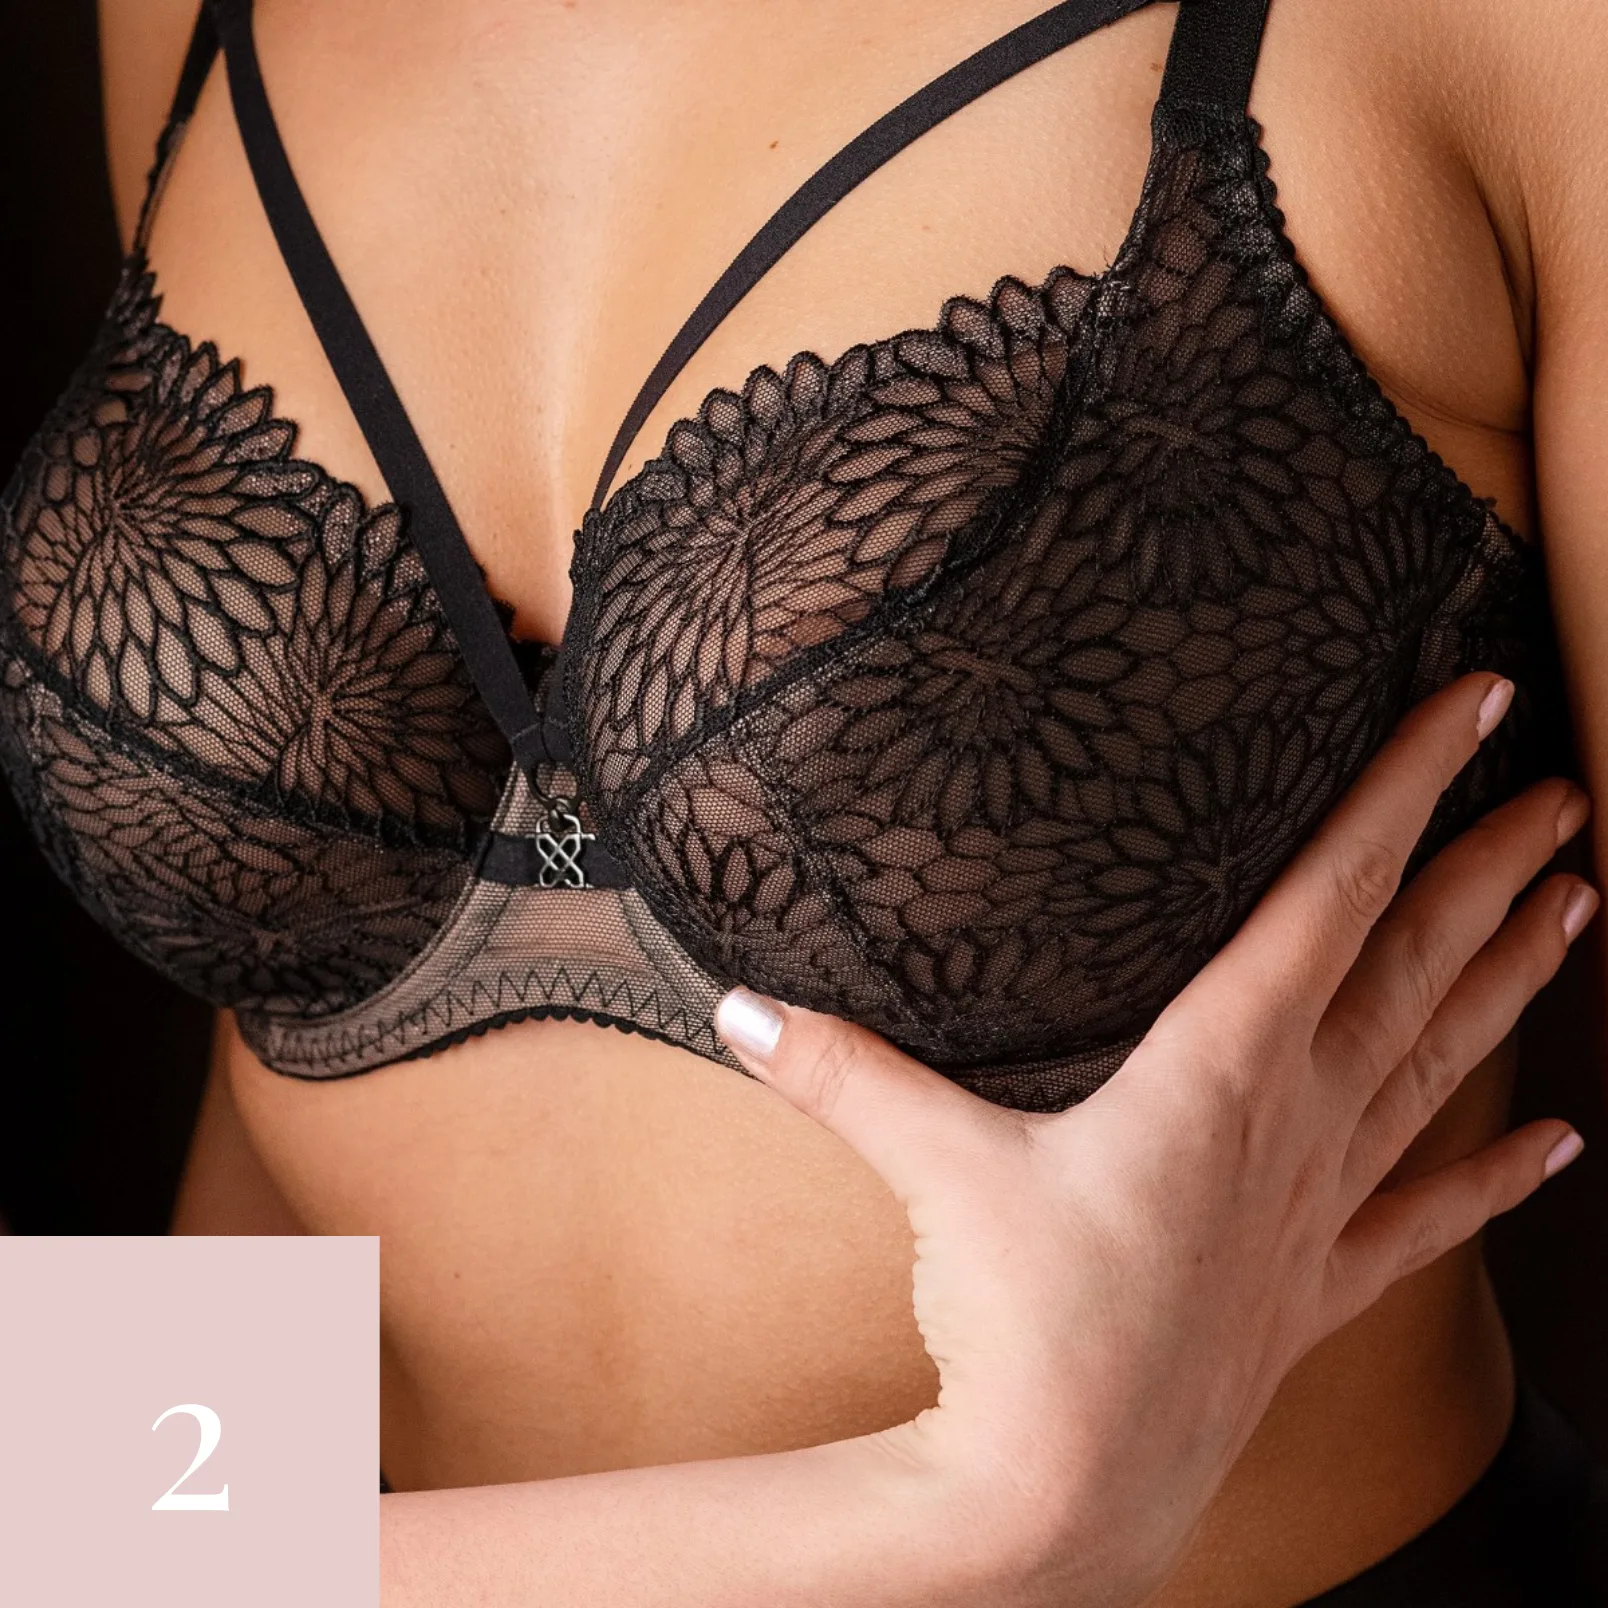 Are you wearing the right bra?